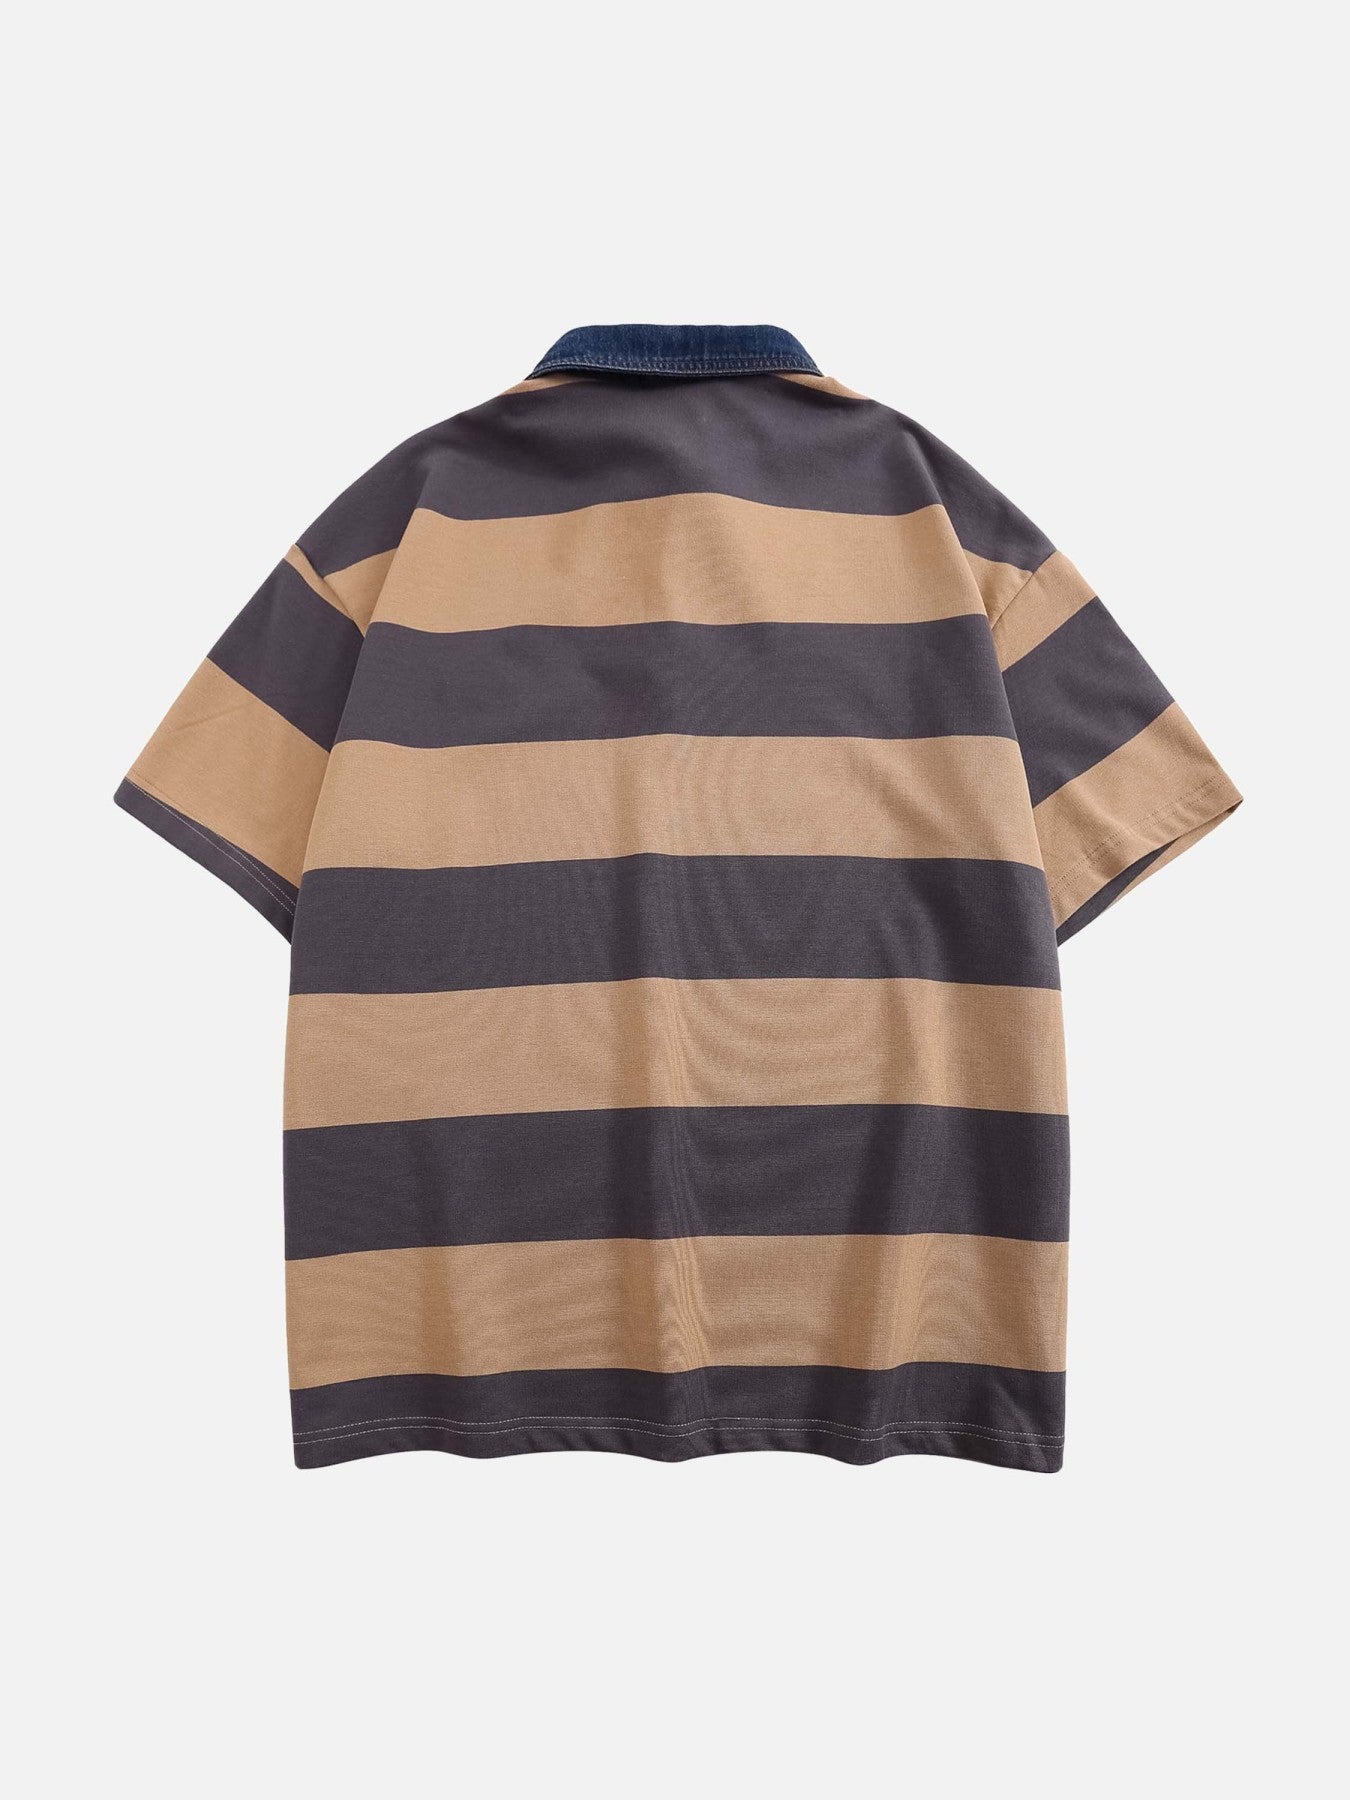 The Supermade Vintage Color Striped Polo Shirt